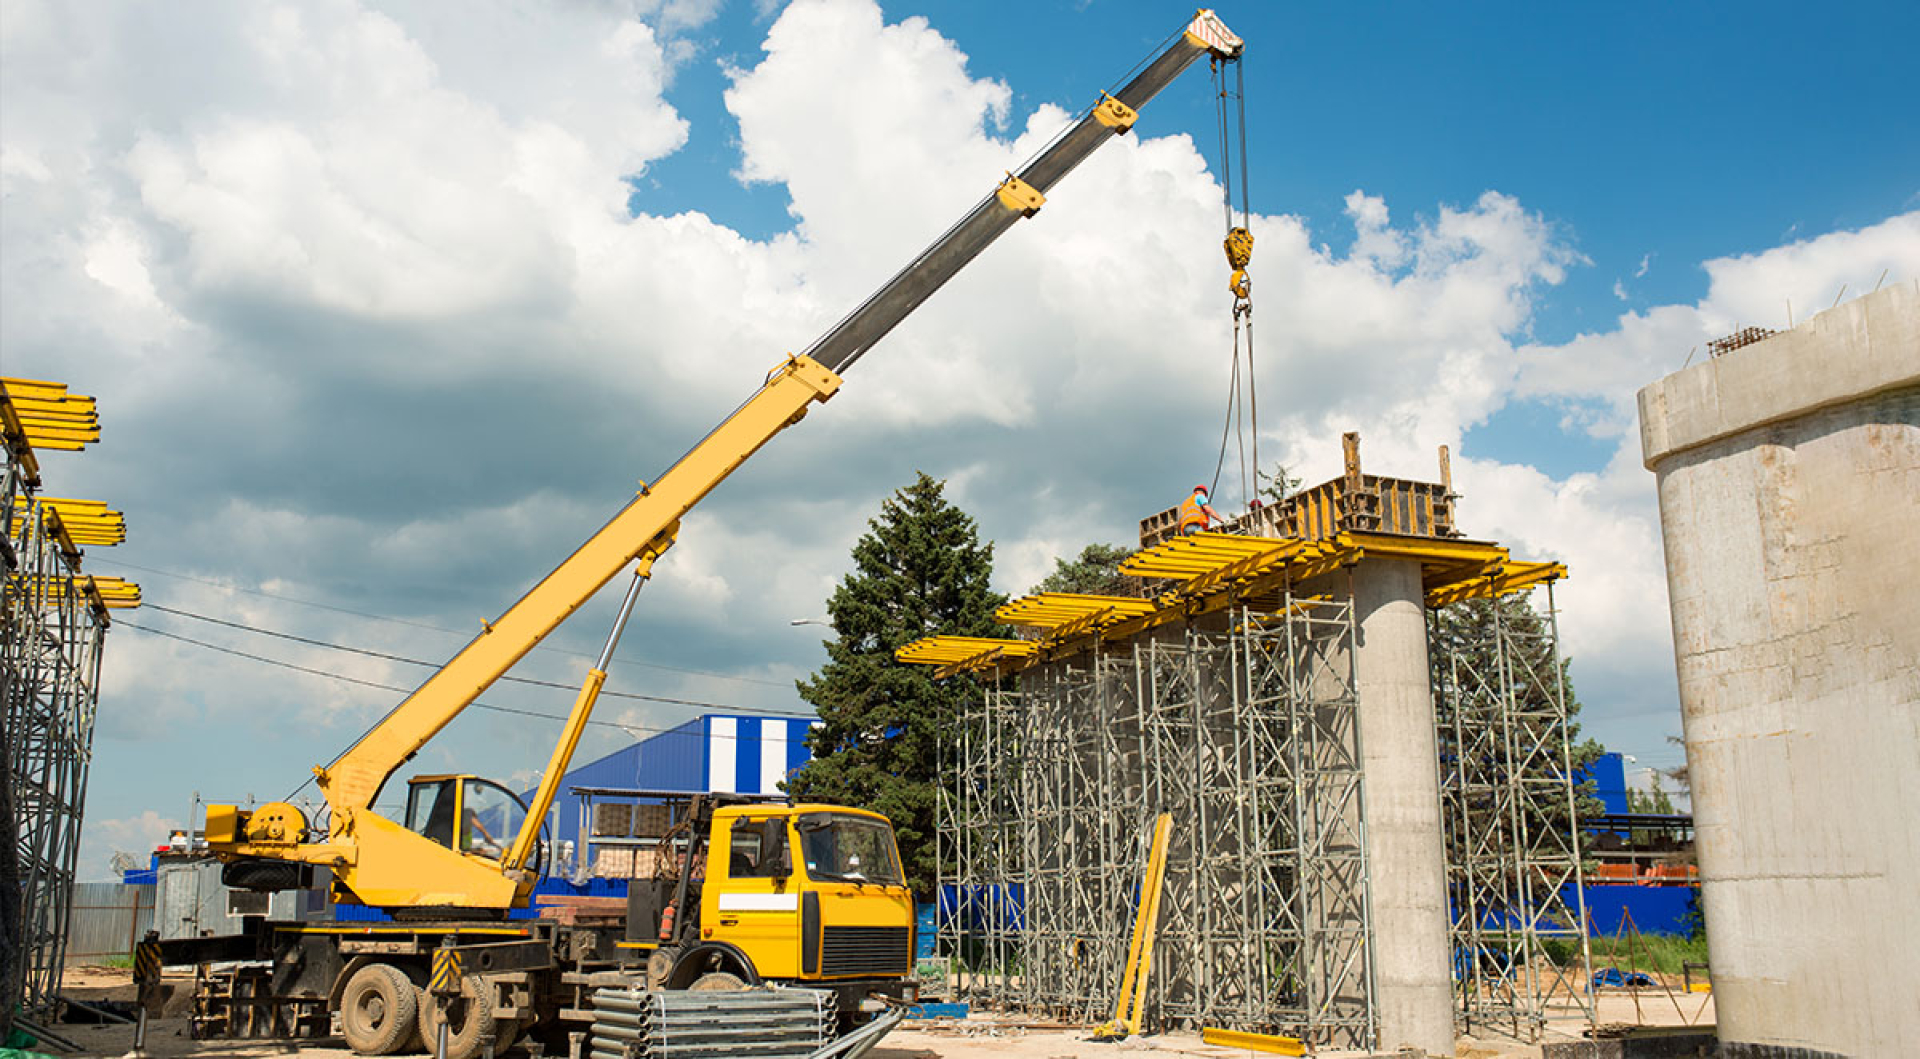 What to Know About Operating a Crane in a Congested Area